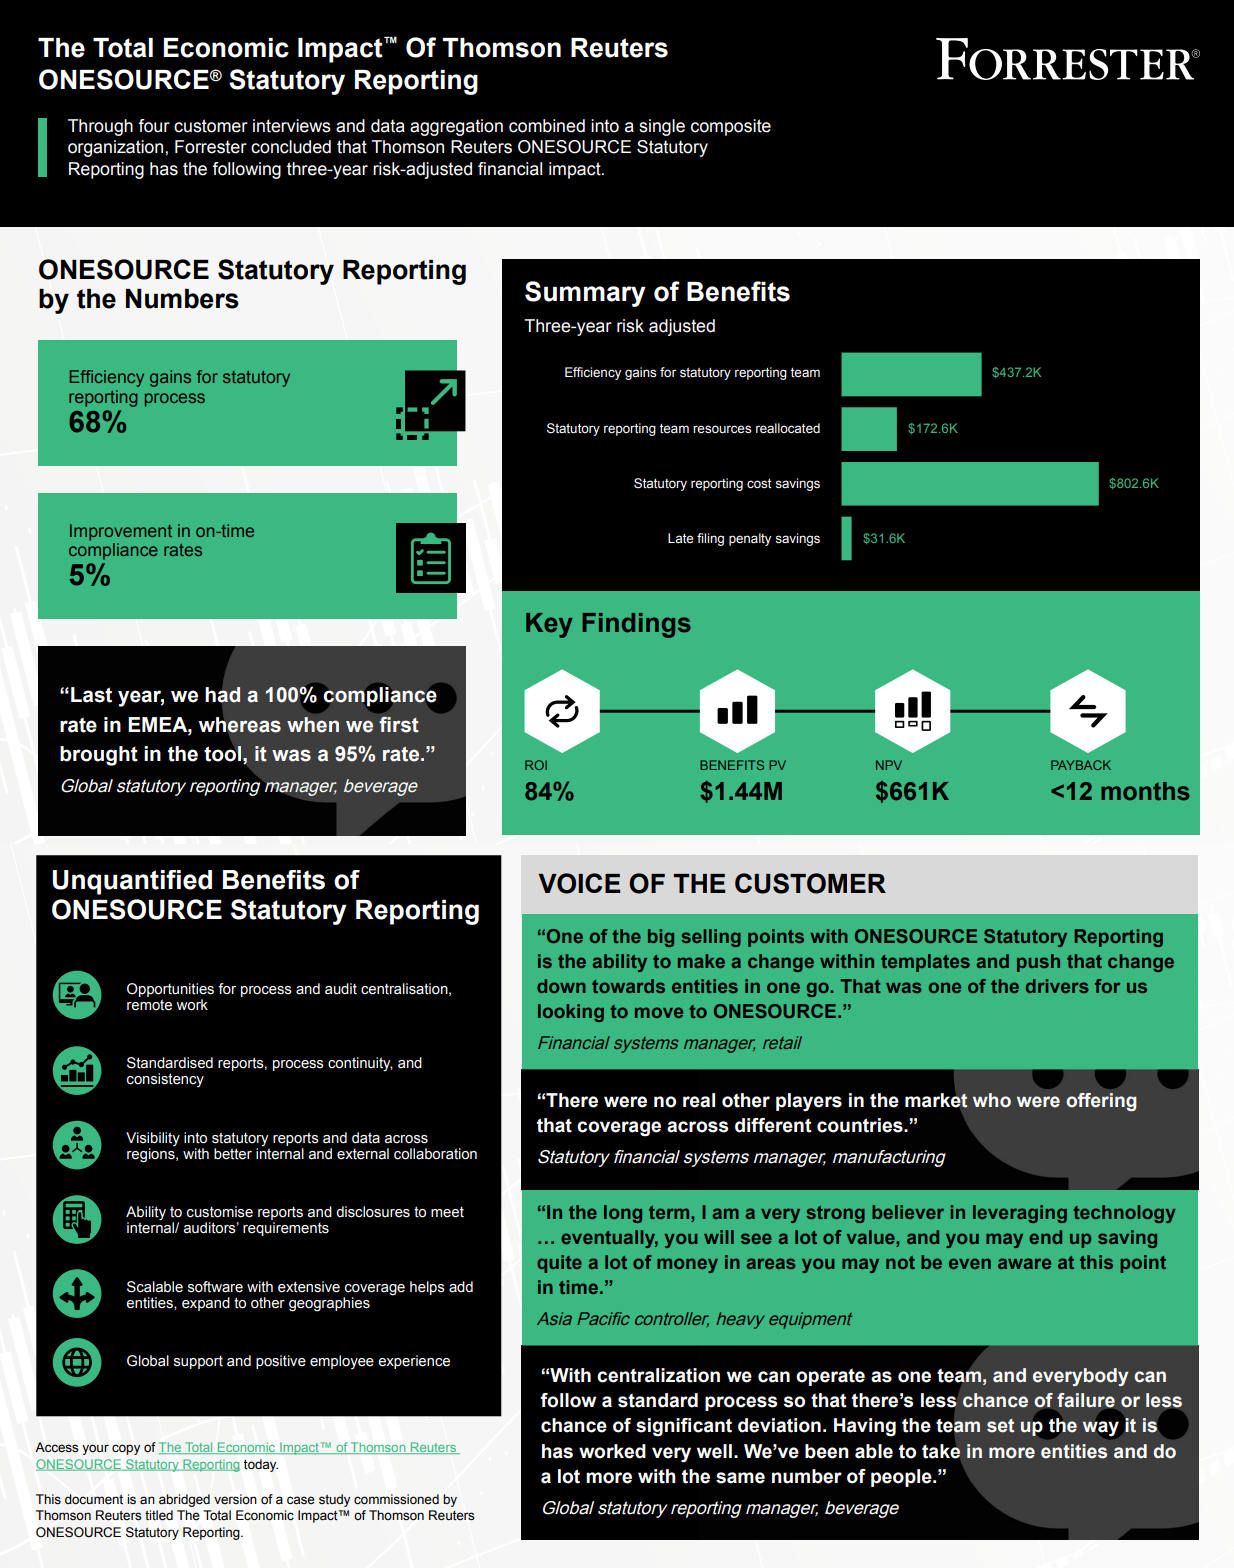 Infographic Forrester Total Economic Impact (TEI) of OS Statutory Reporting